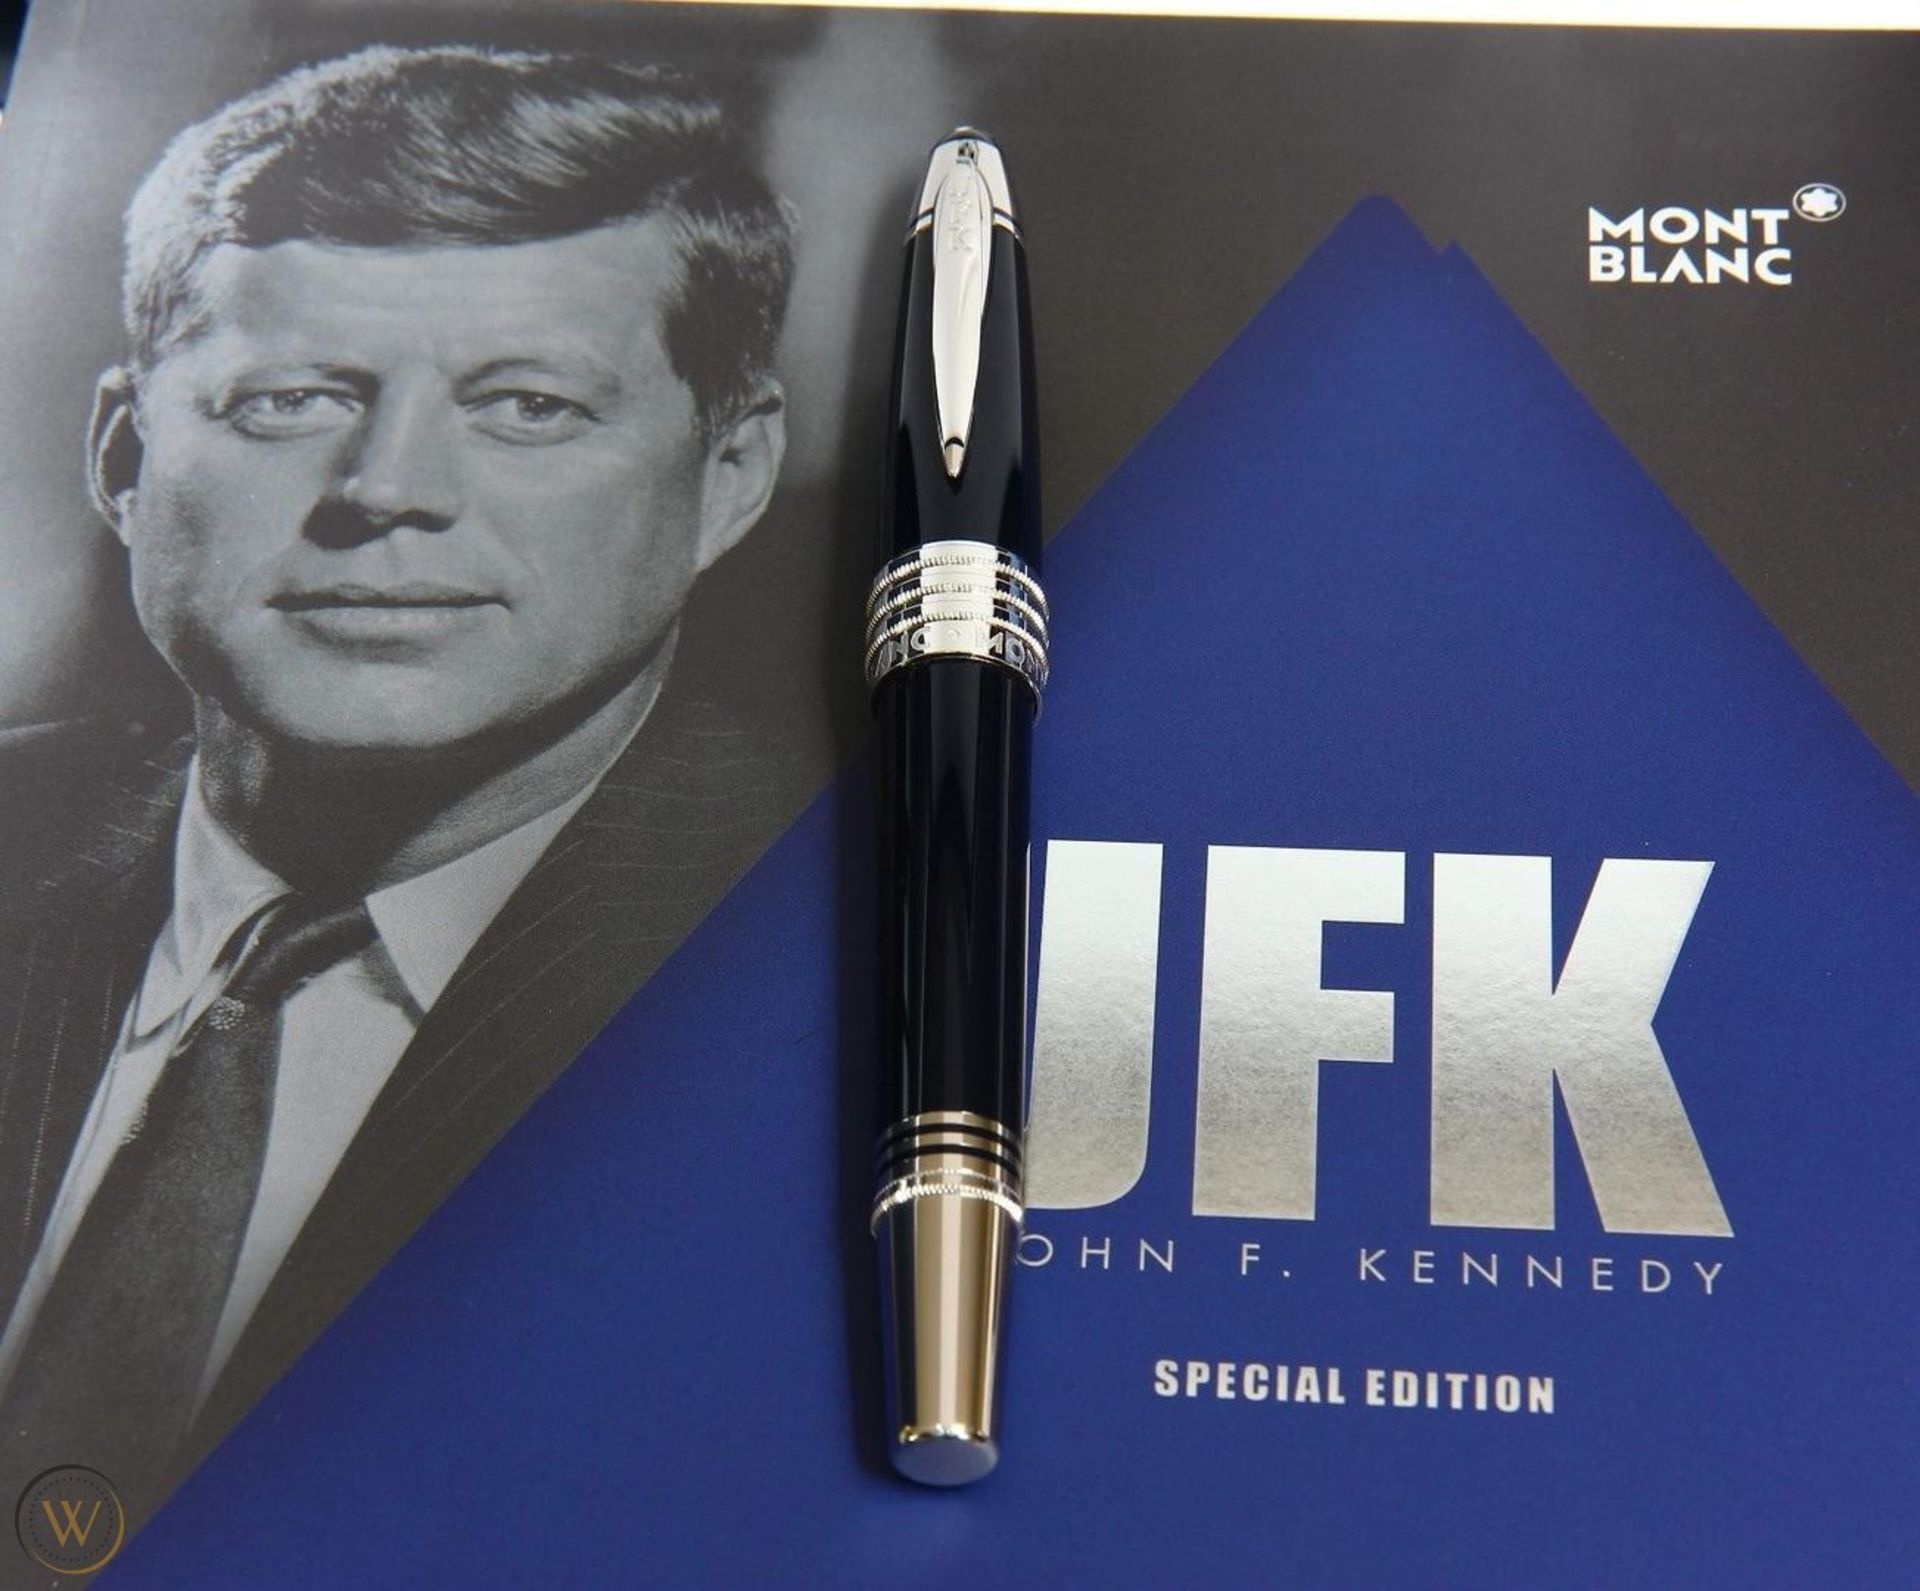 Montblanc-Great Characters John F. Kennedy Special Edition - Image 2 of 6